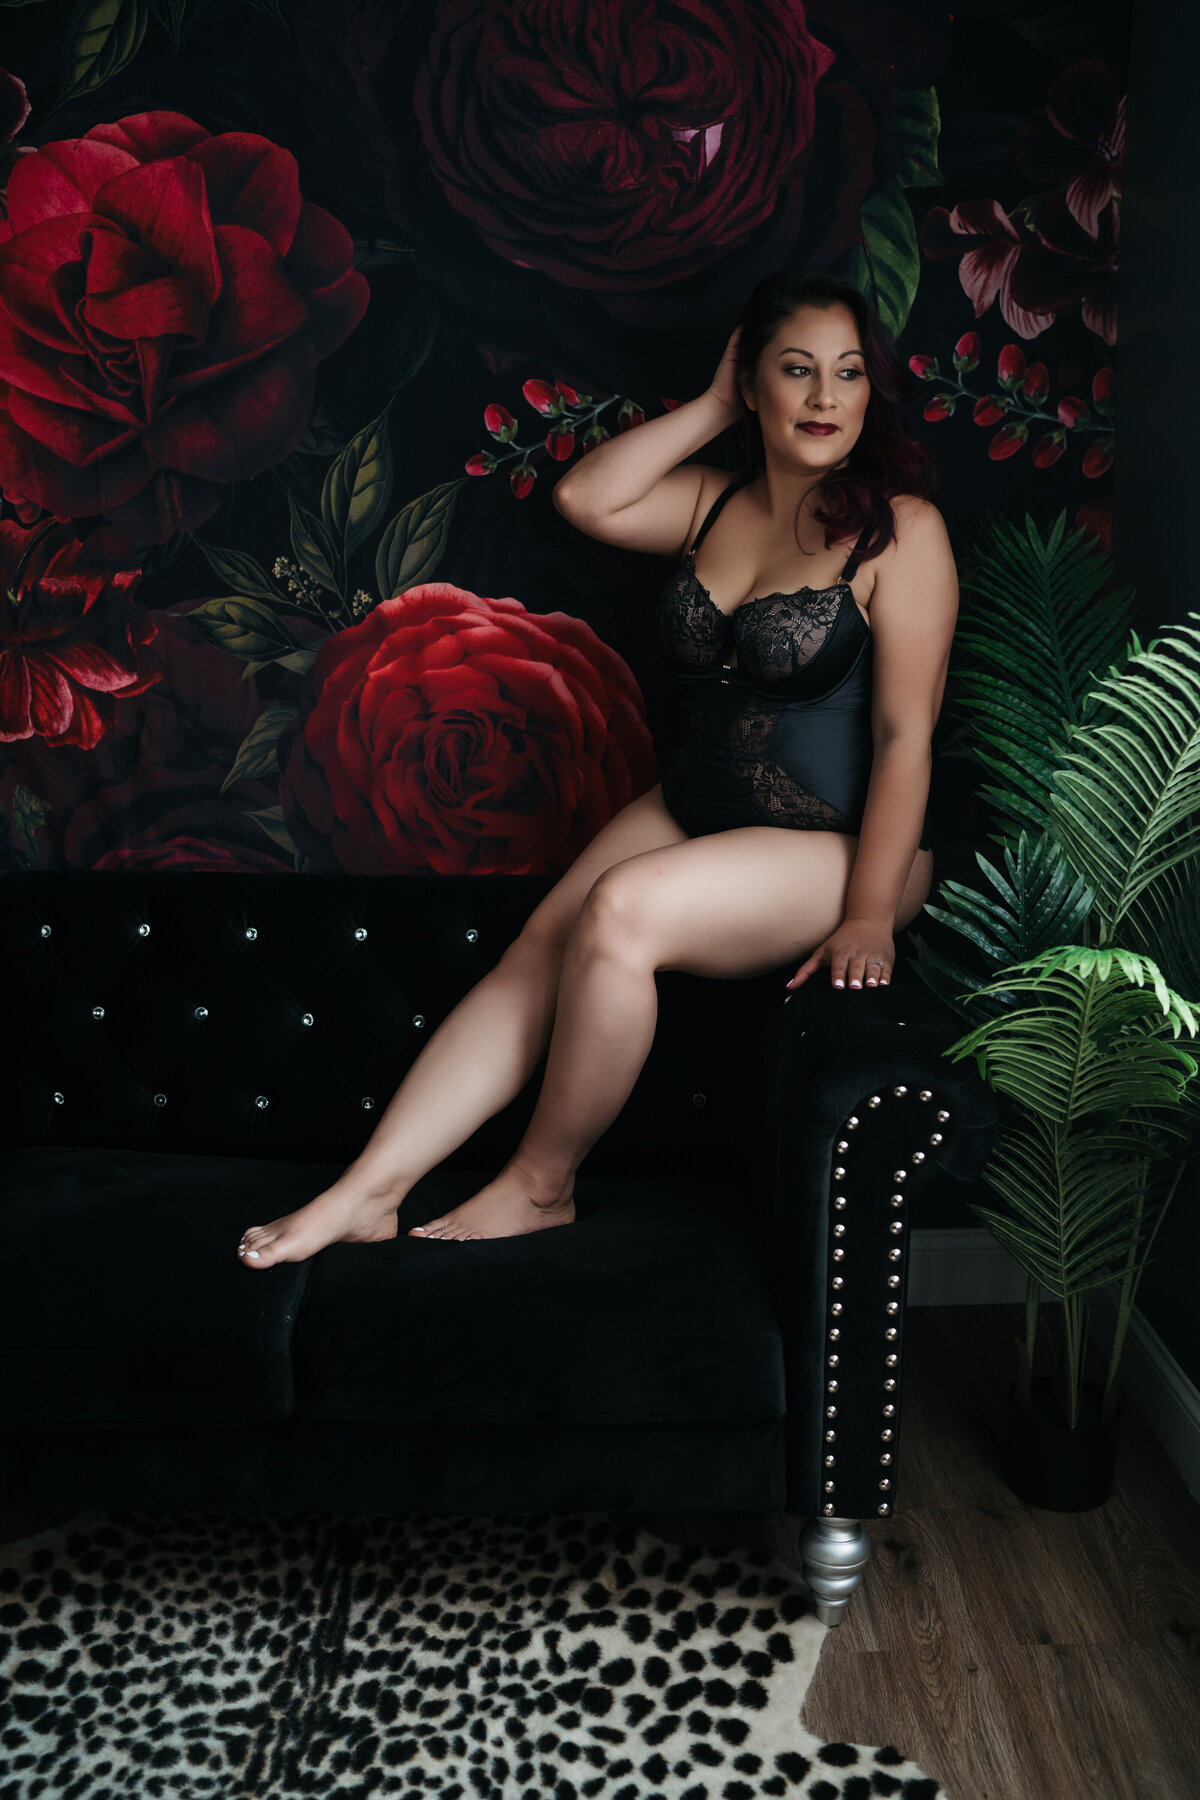 A woman in black lace lingerie sits on the arm of a black chair in front of a large floral tapestry